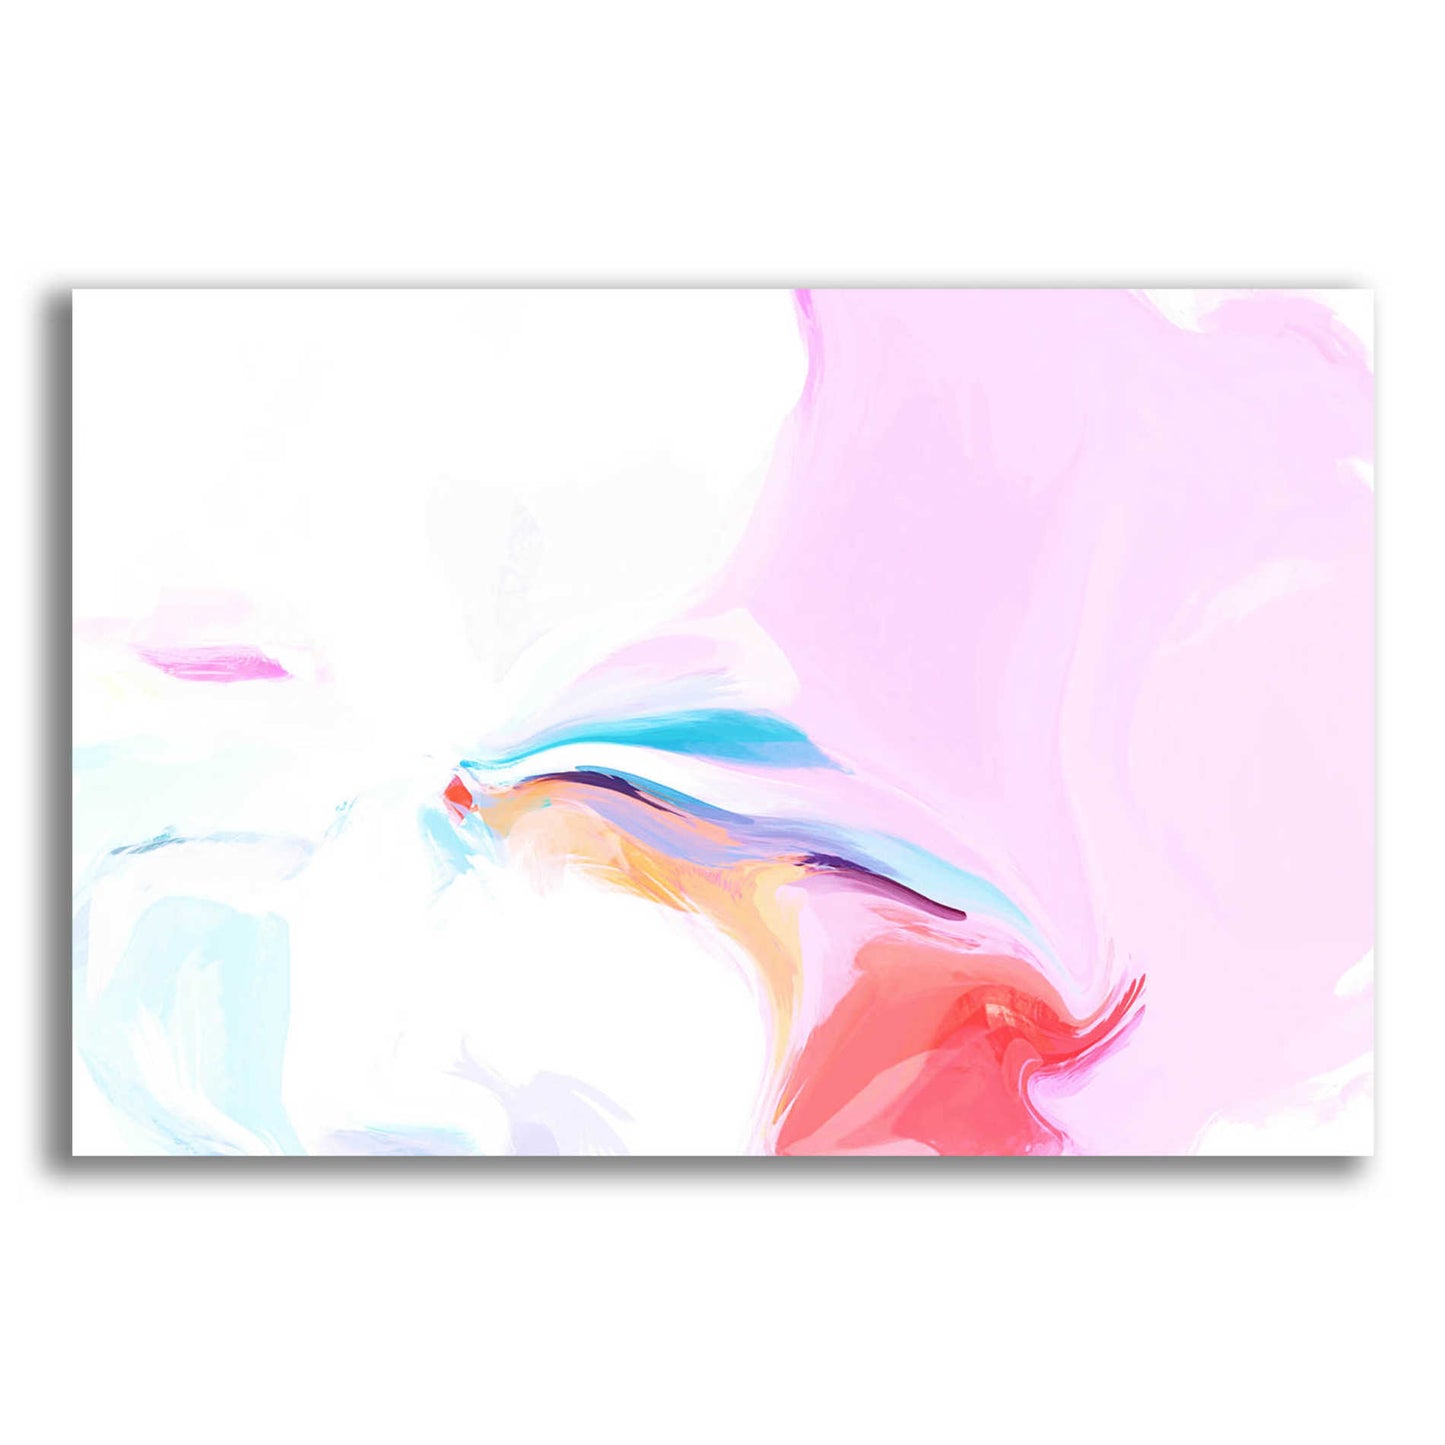 Epic Art 'Abstract Colorful Flows 8' by Irena Orlov Acrylic Glass Wall Art